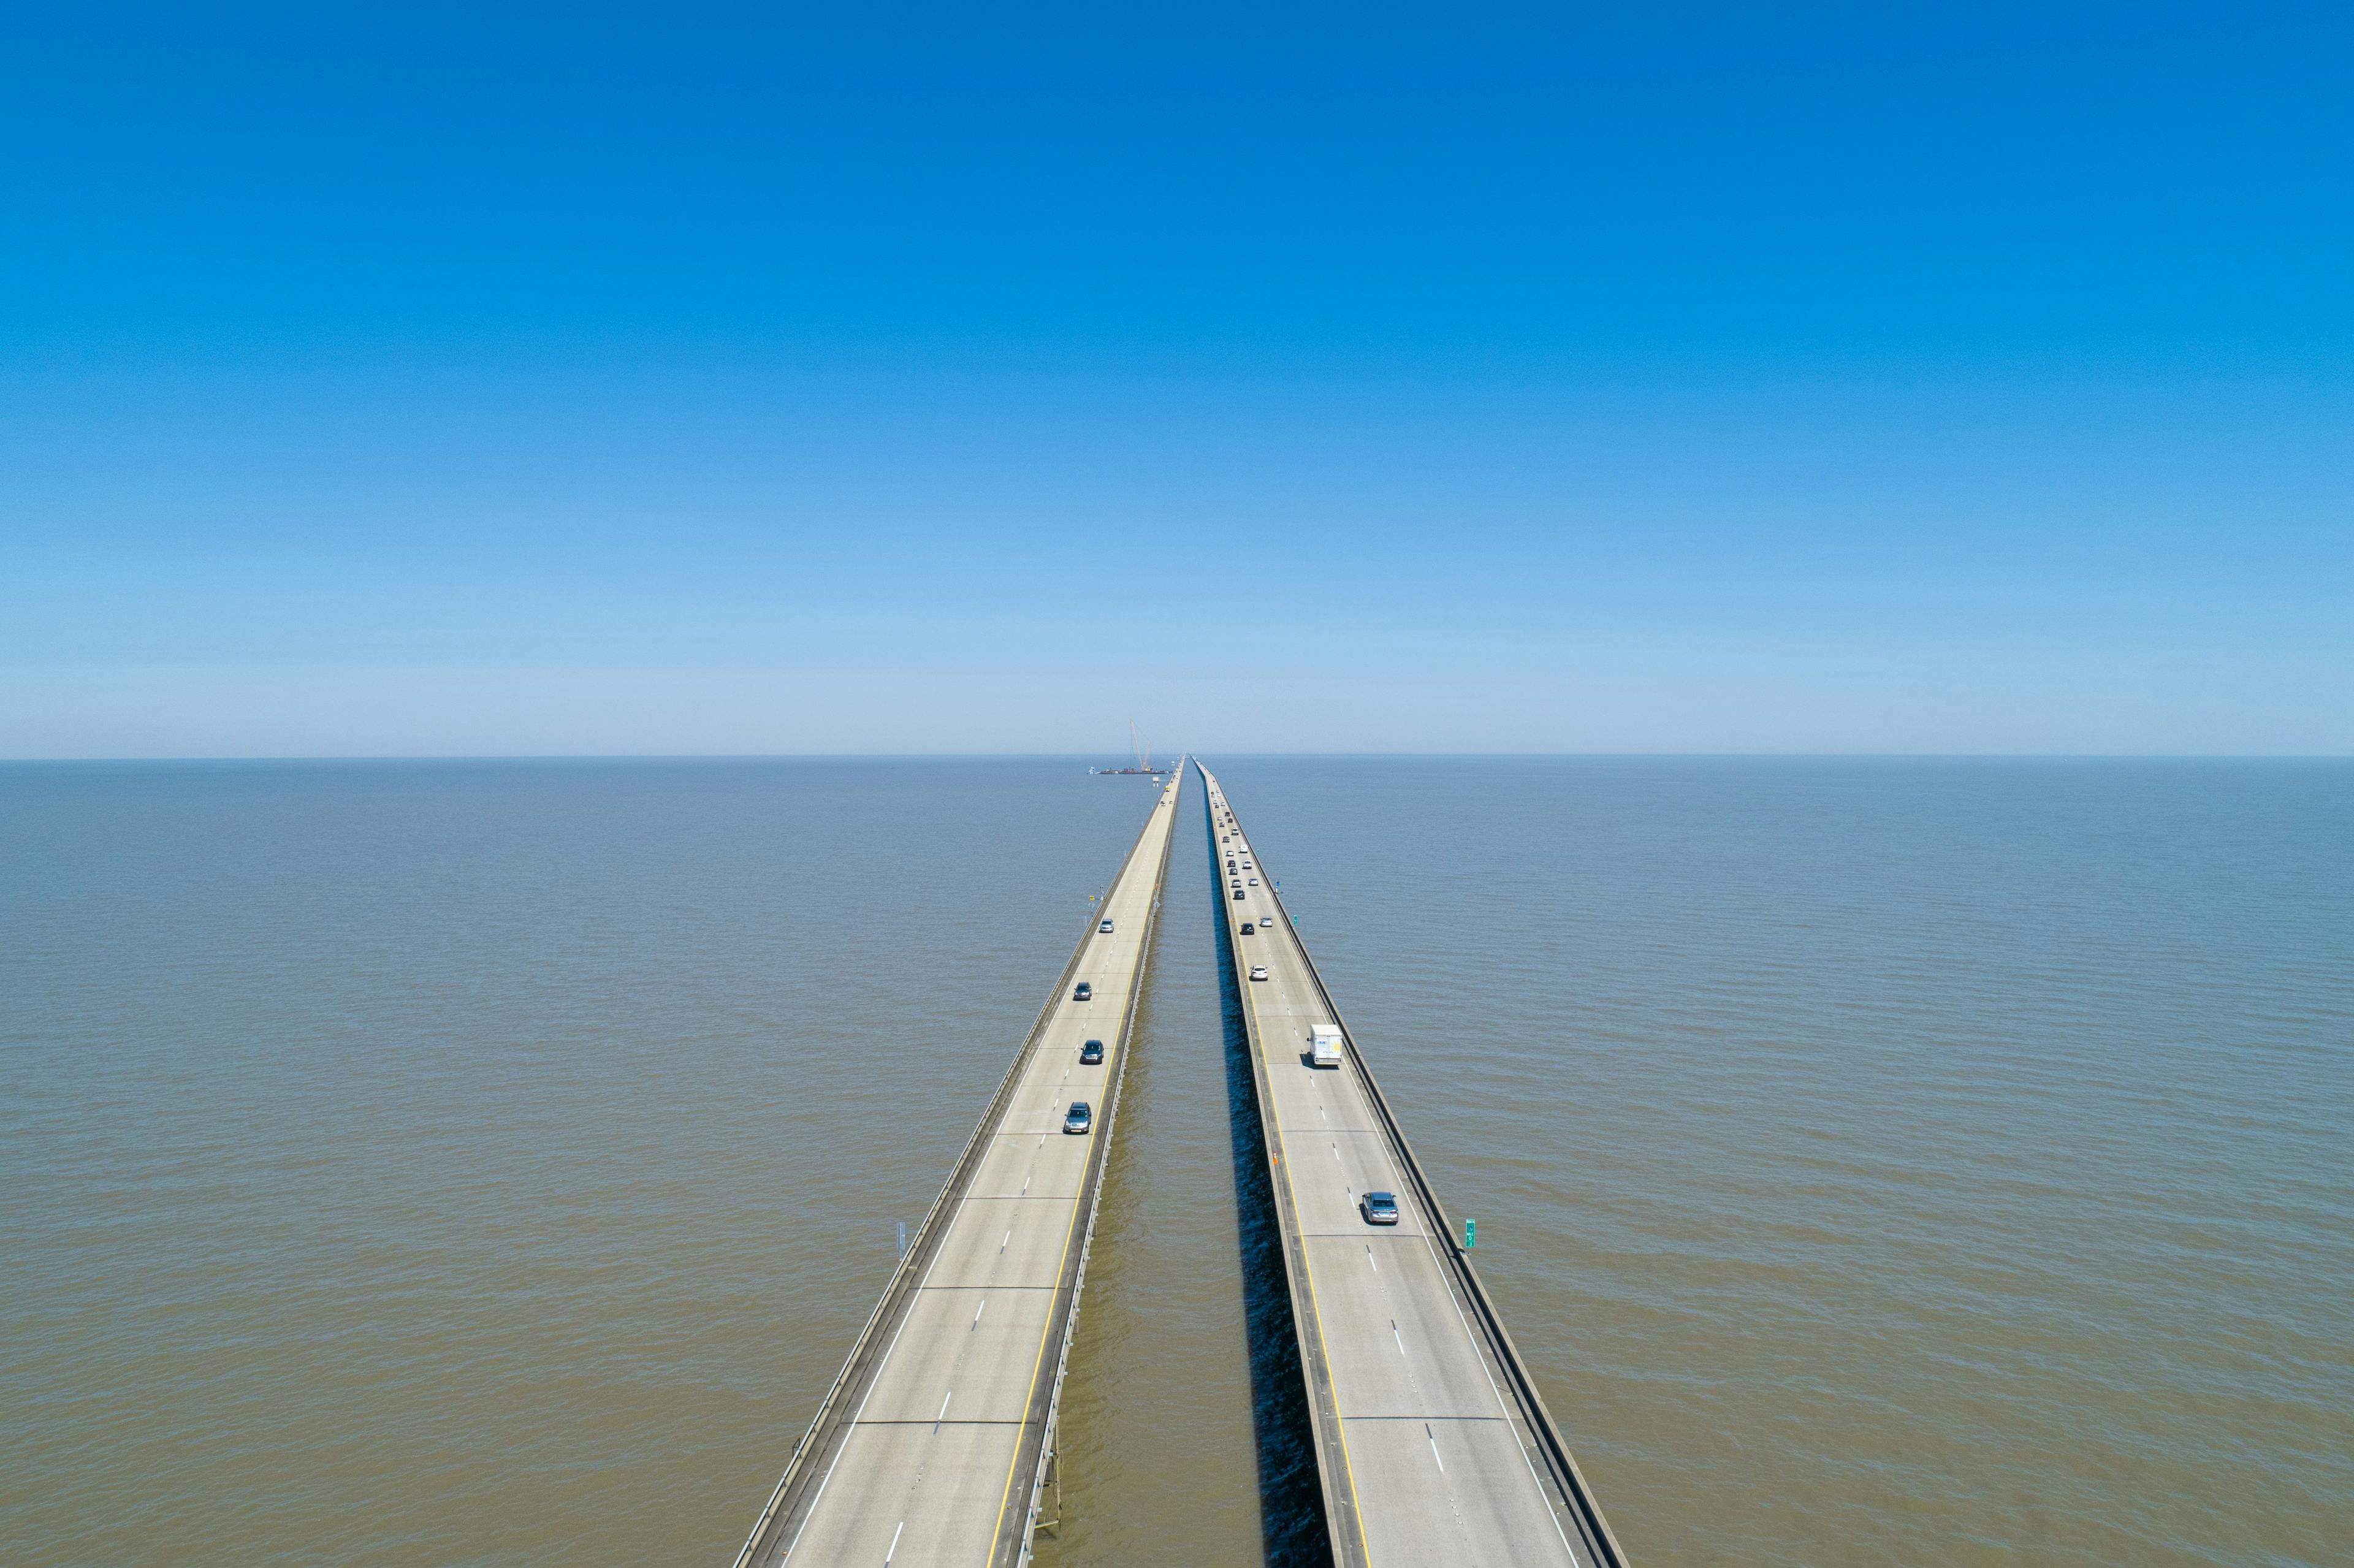 Lake Pontchartrain Causeway bridge with some cars passing on it from an above angle